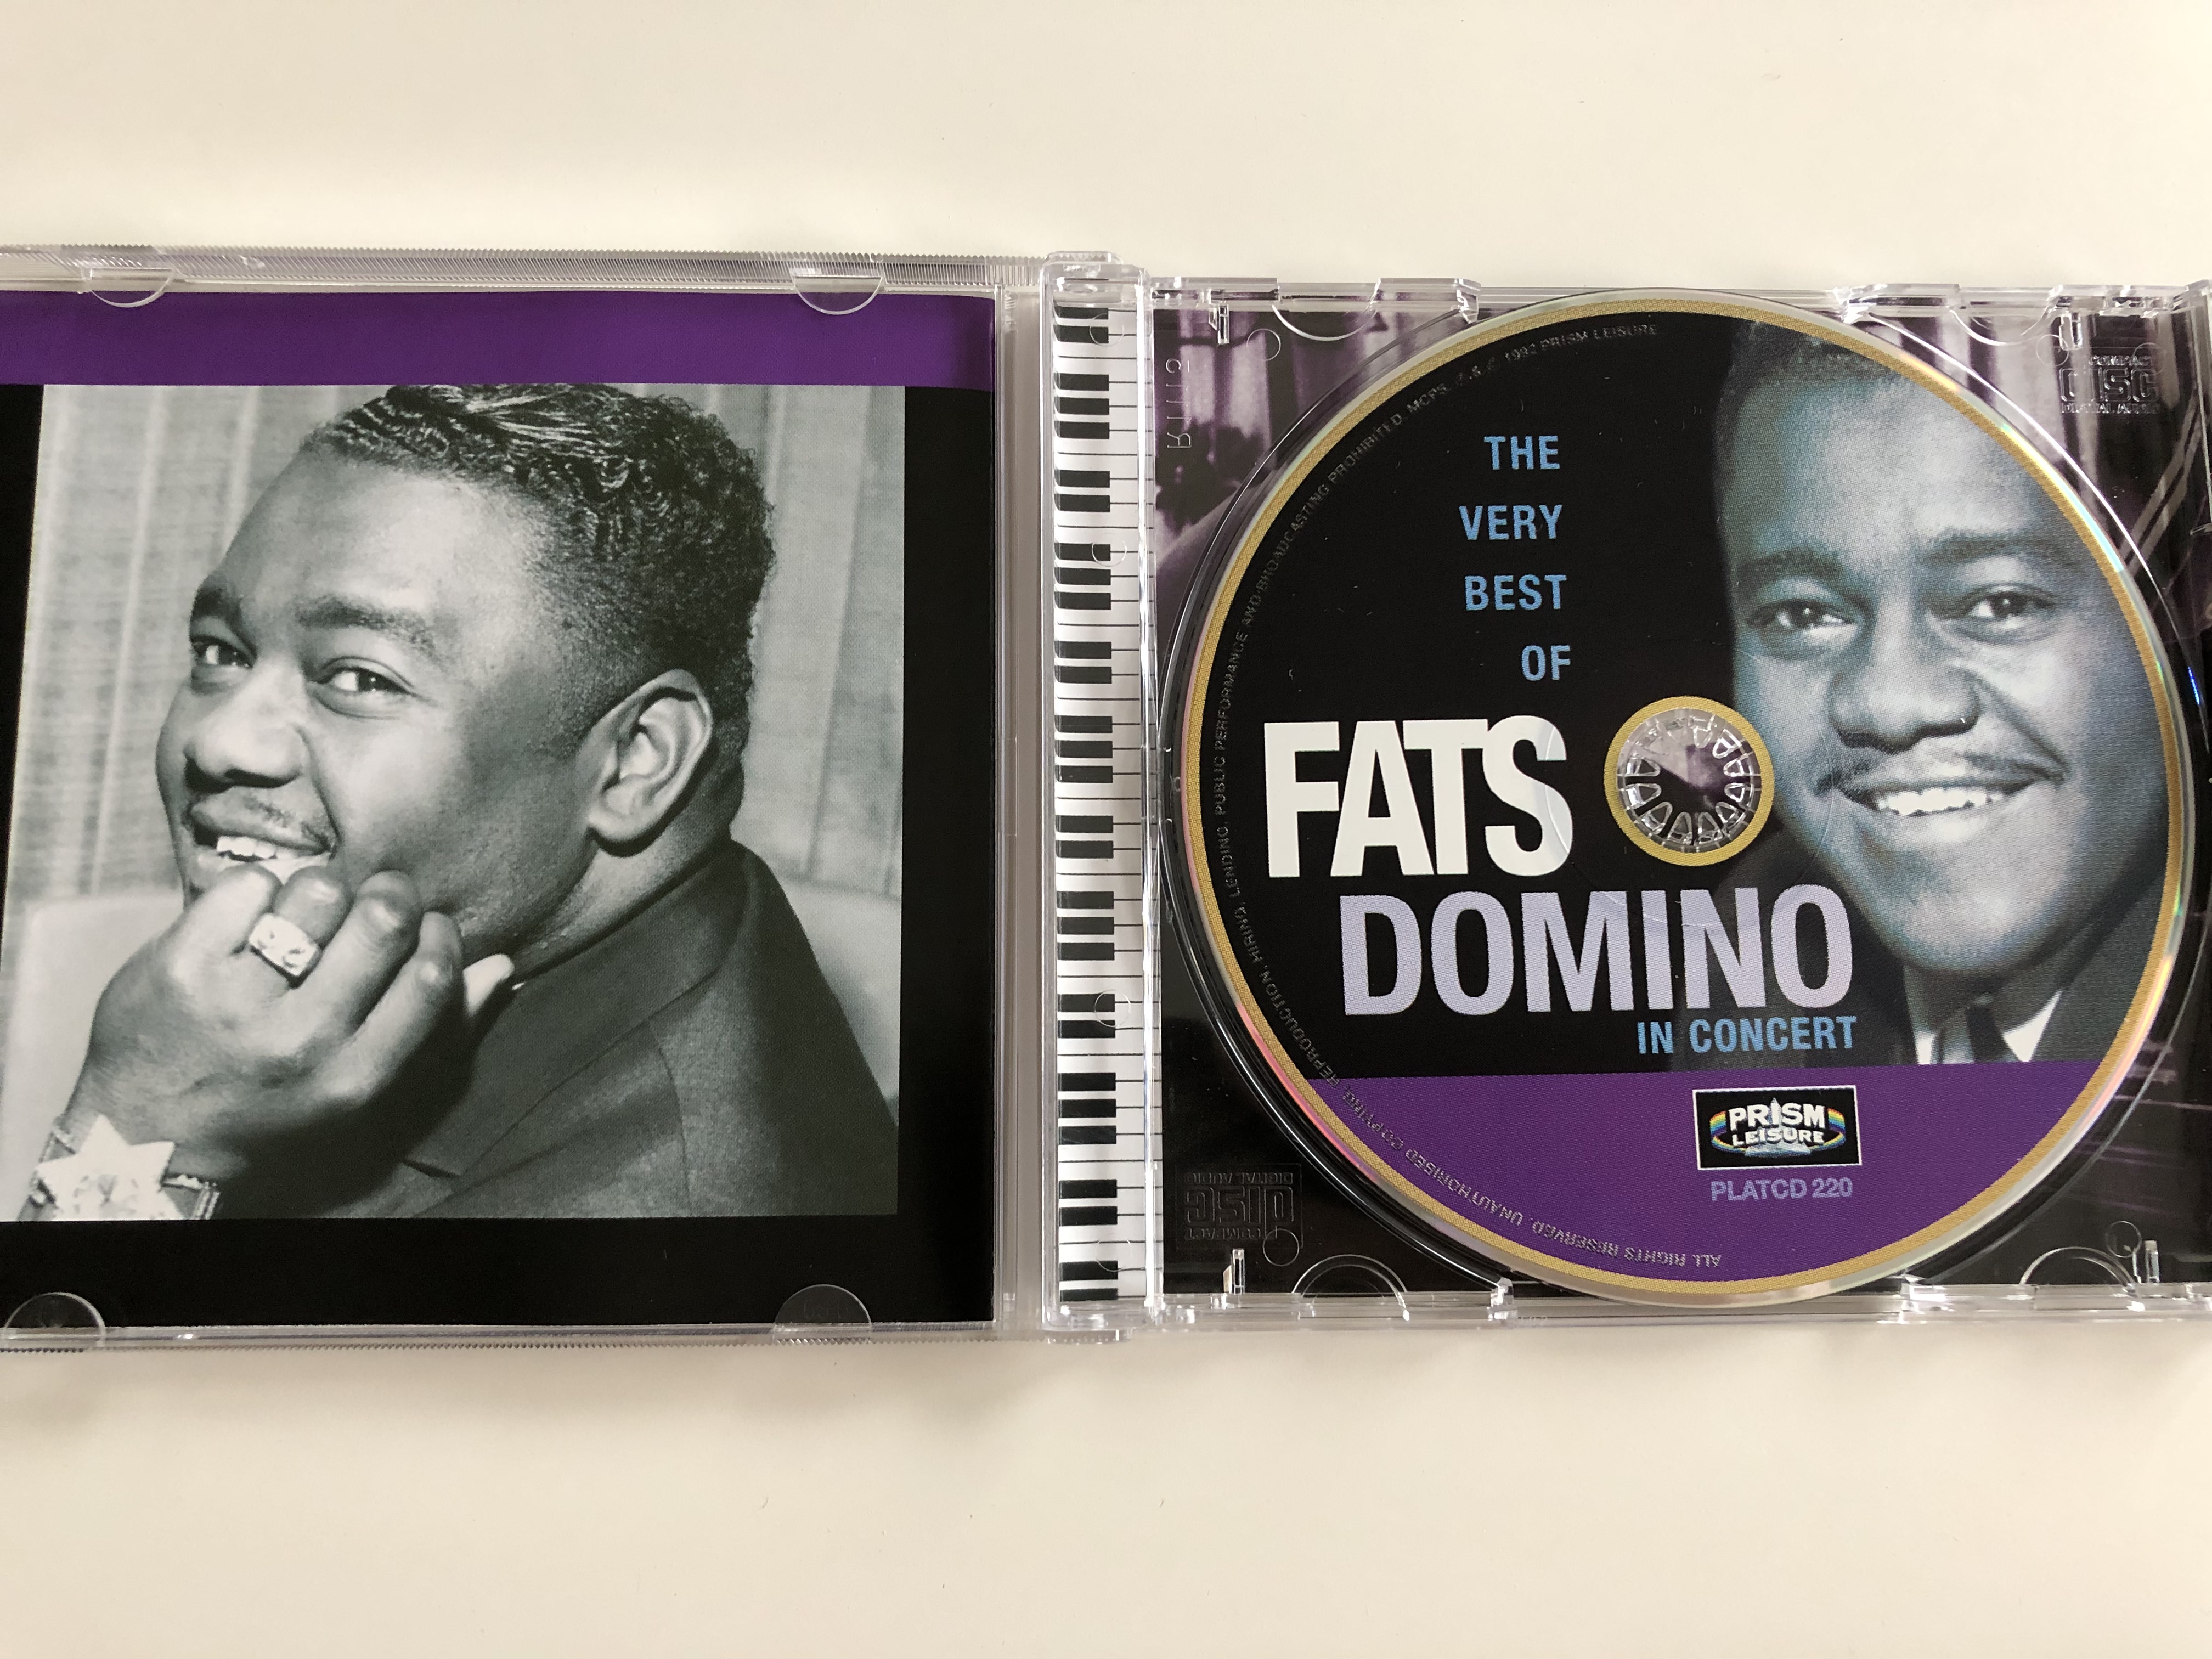 blueberry-hill-the-very-best-of-fats-domino-in-concert-audio-cd-1997-platcd-220-3-.jpg